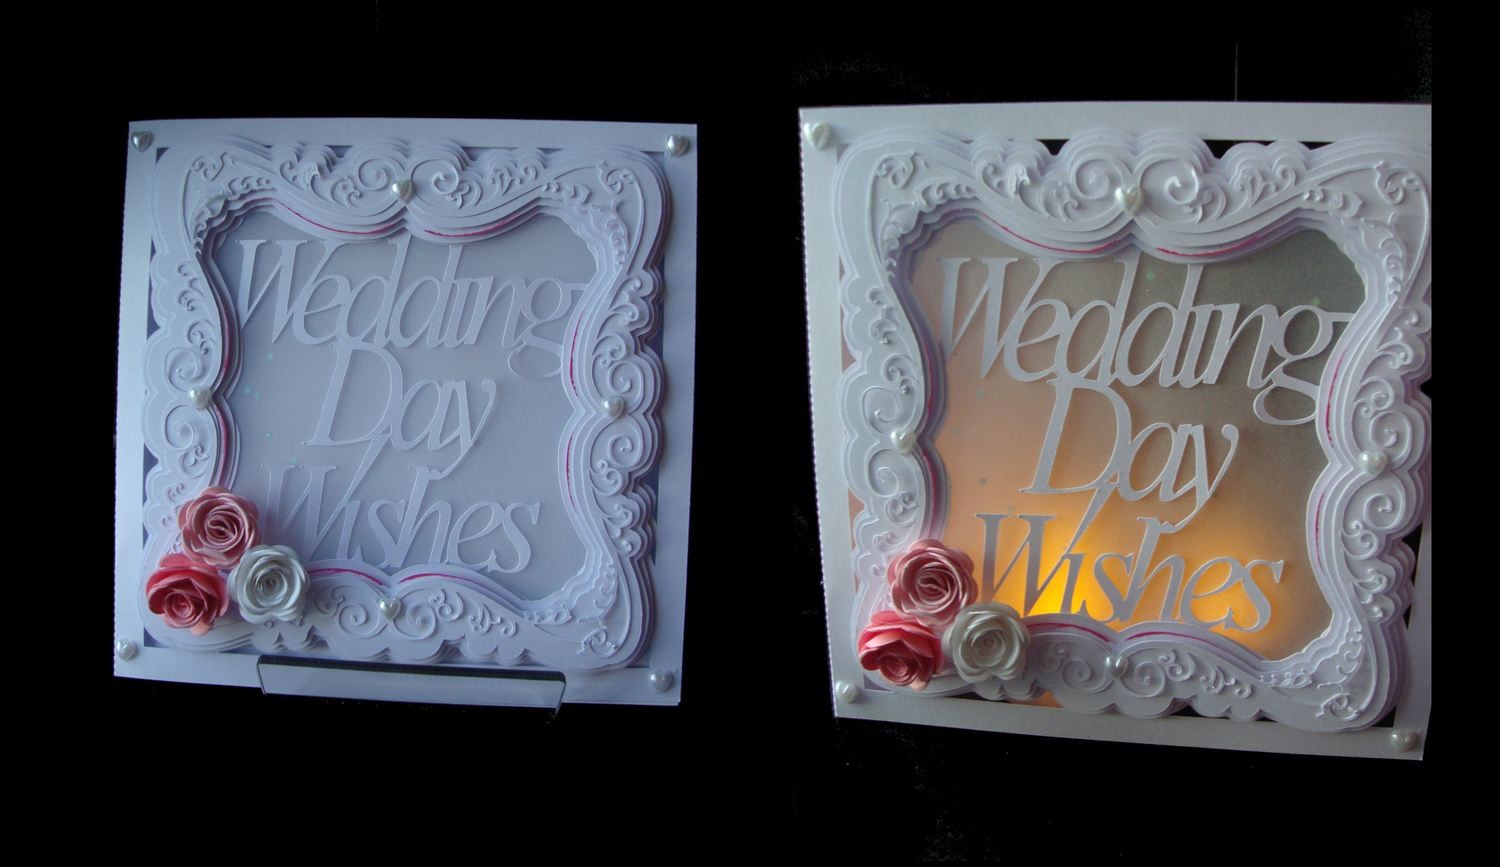 Wedding Day Wishes Card Faux Embossed